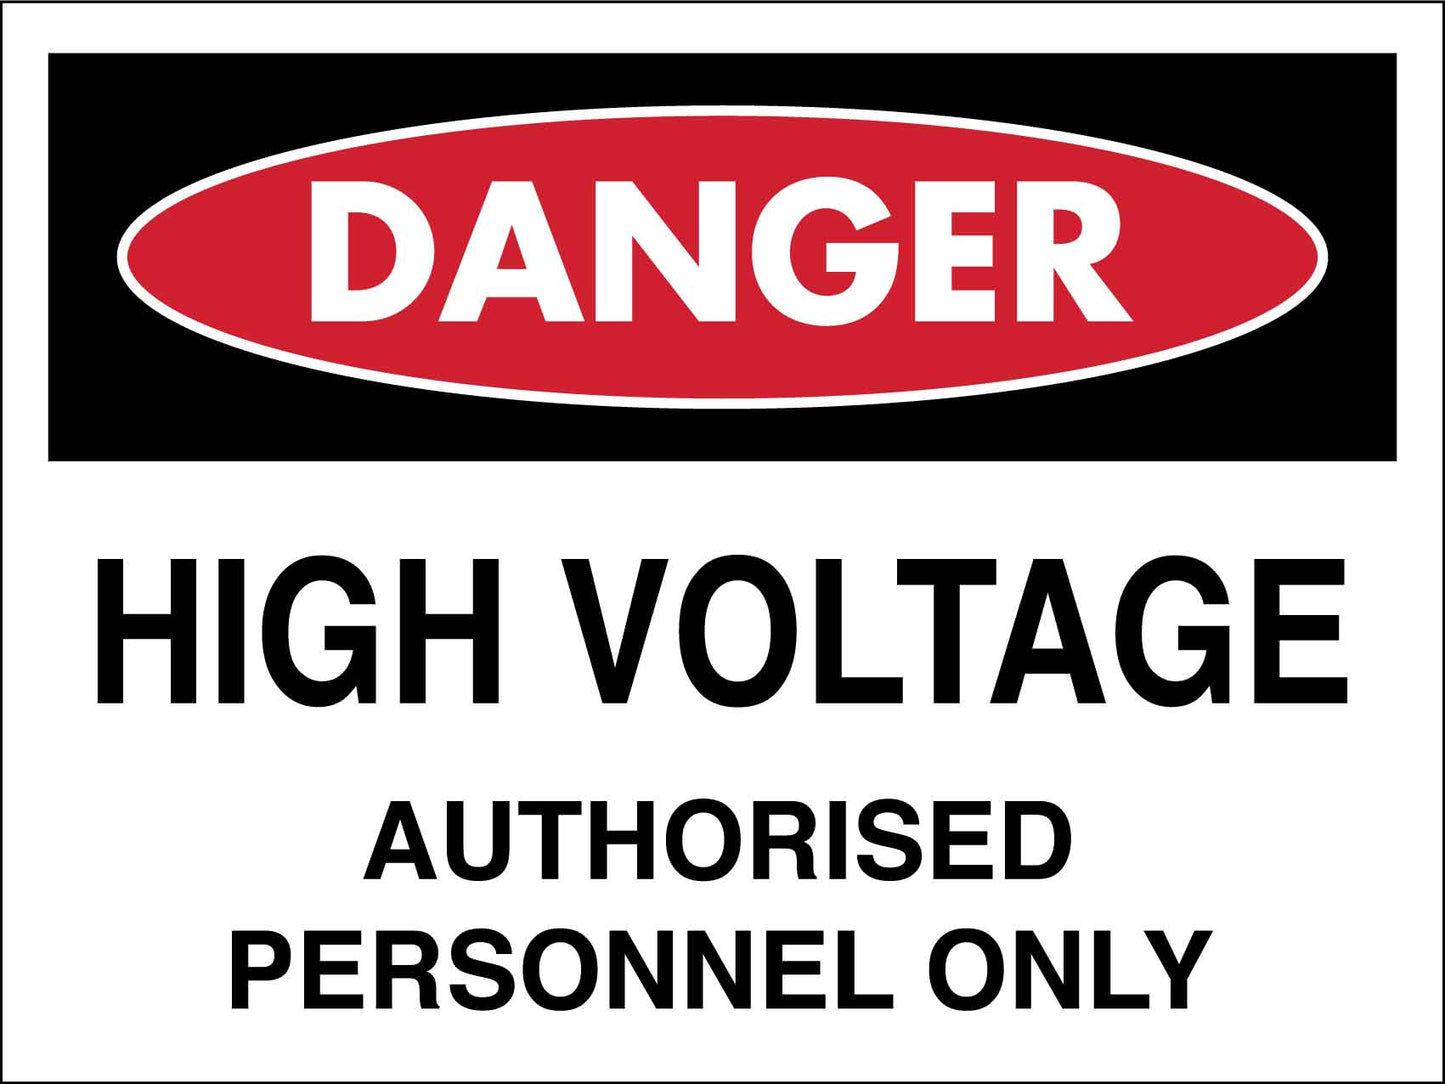 Danger High Voltage Authorised Personnel Only Sign